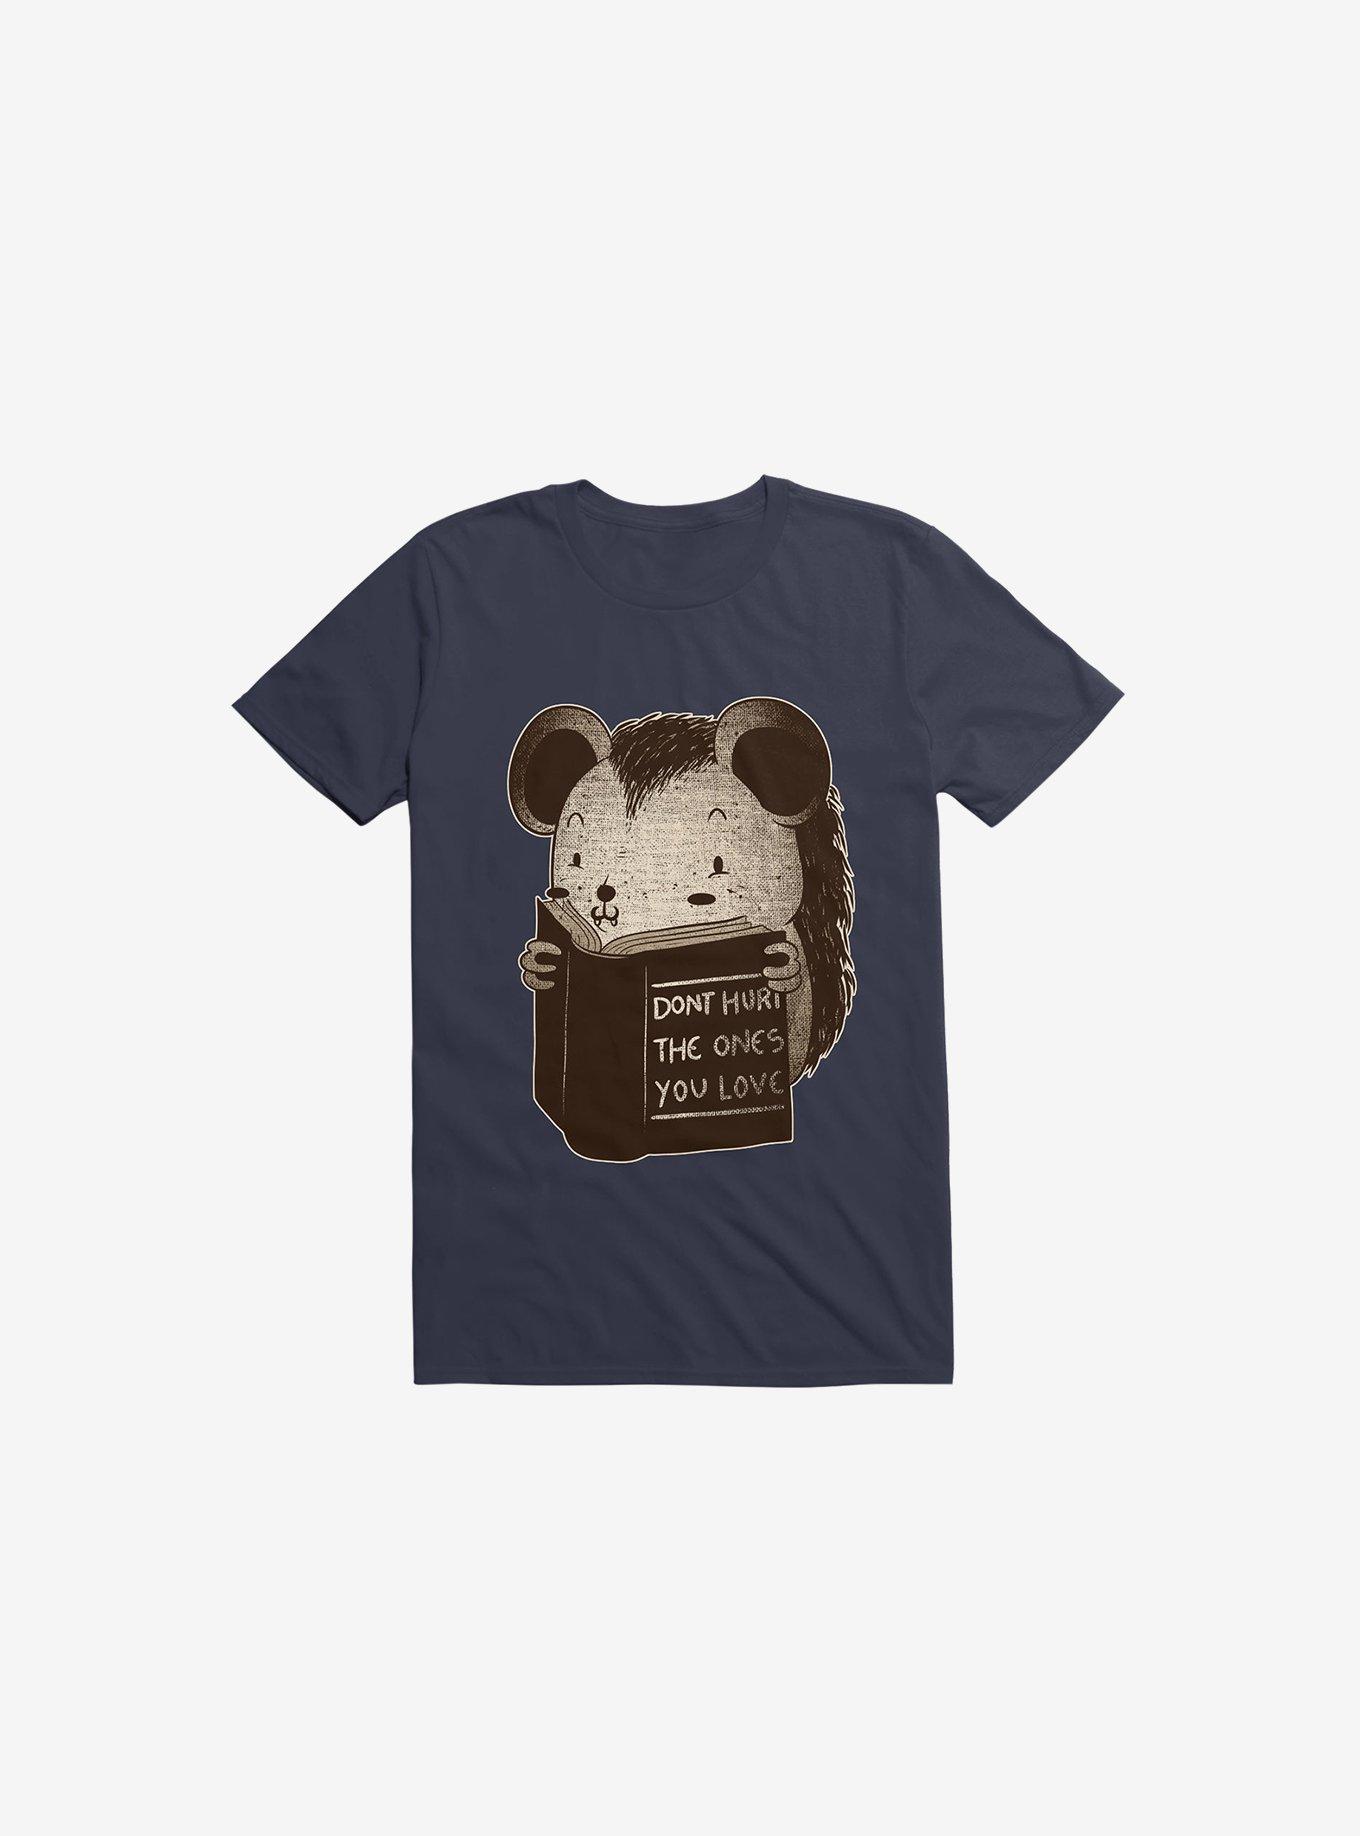 Hedgehog Book: Don't Hurt The Ones You Love Navy Blue T-Shirt